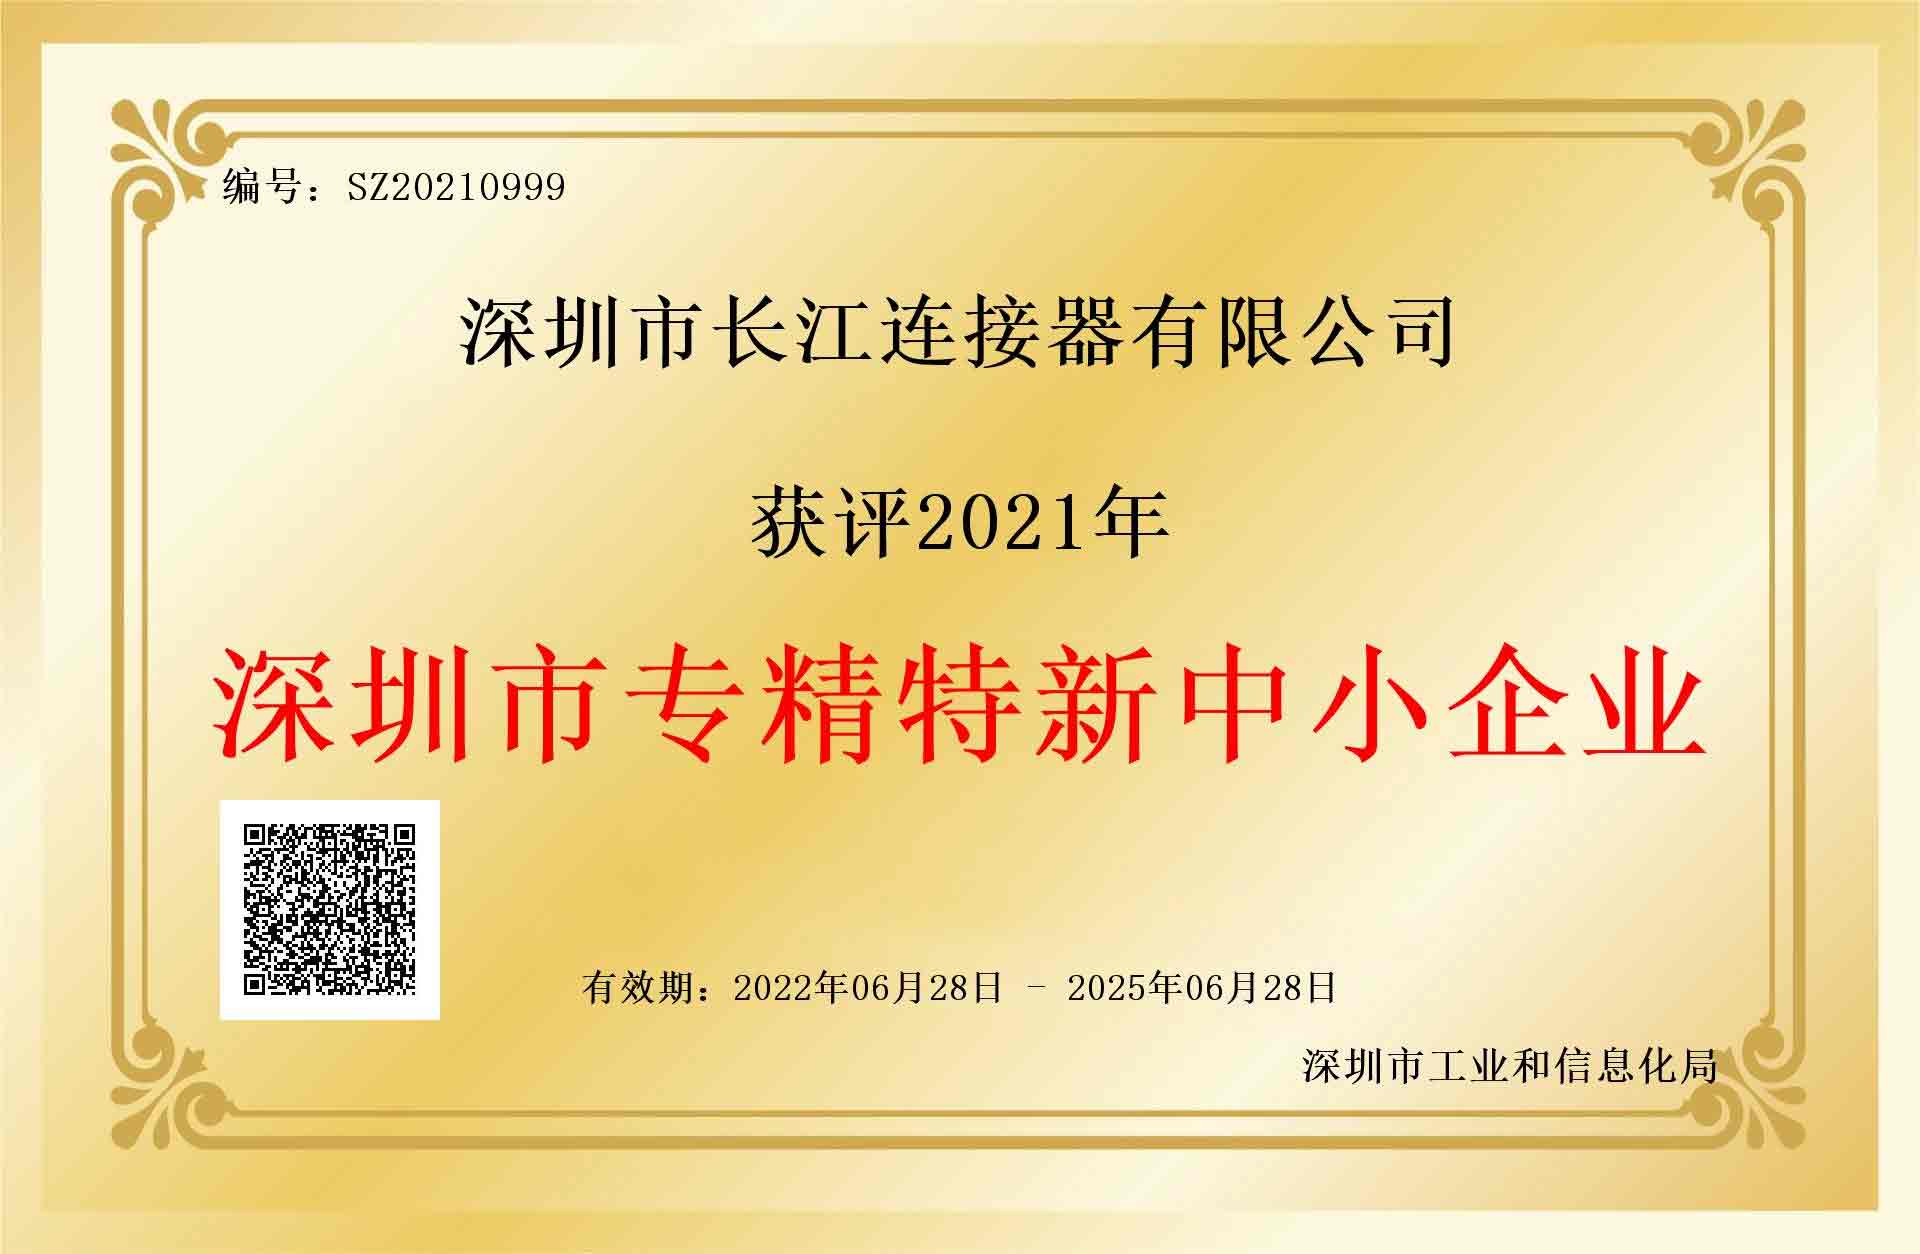 Warmly congratulate Changjiang Connectors on being awarded the title of Shenzhen Specialized, Refined, and New Small and Medium Enterprise!